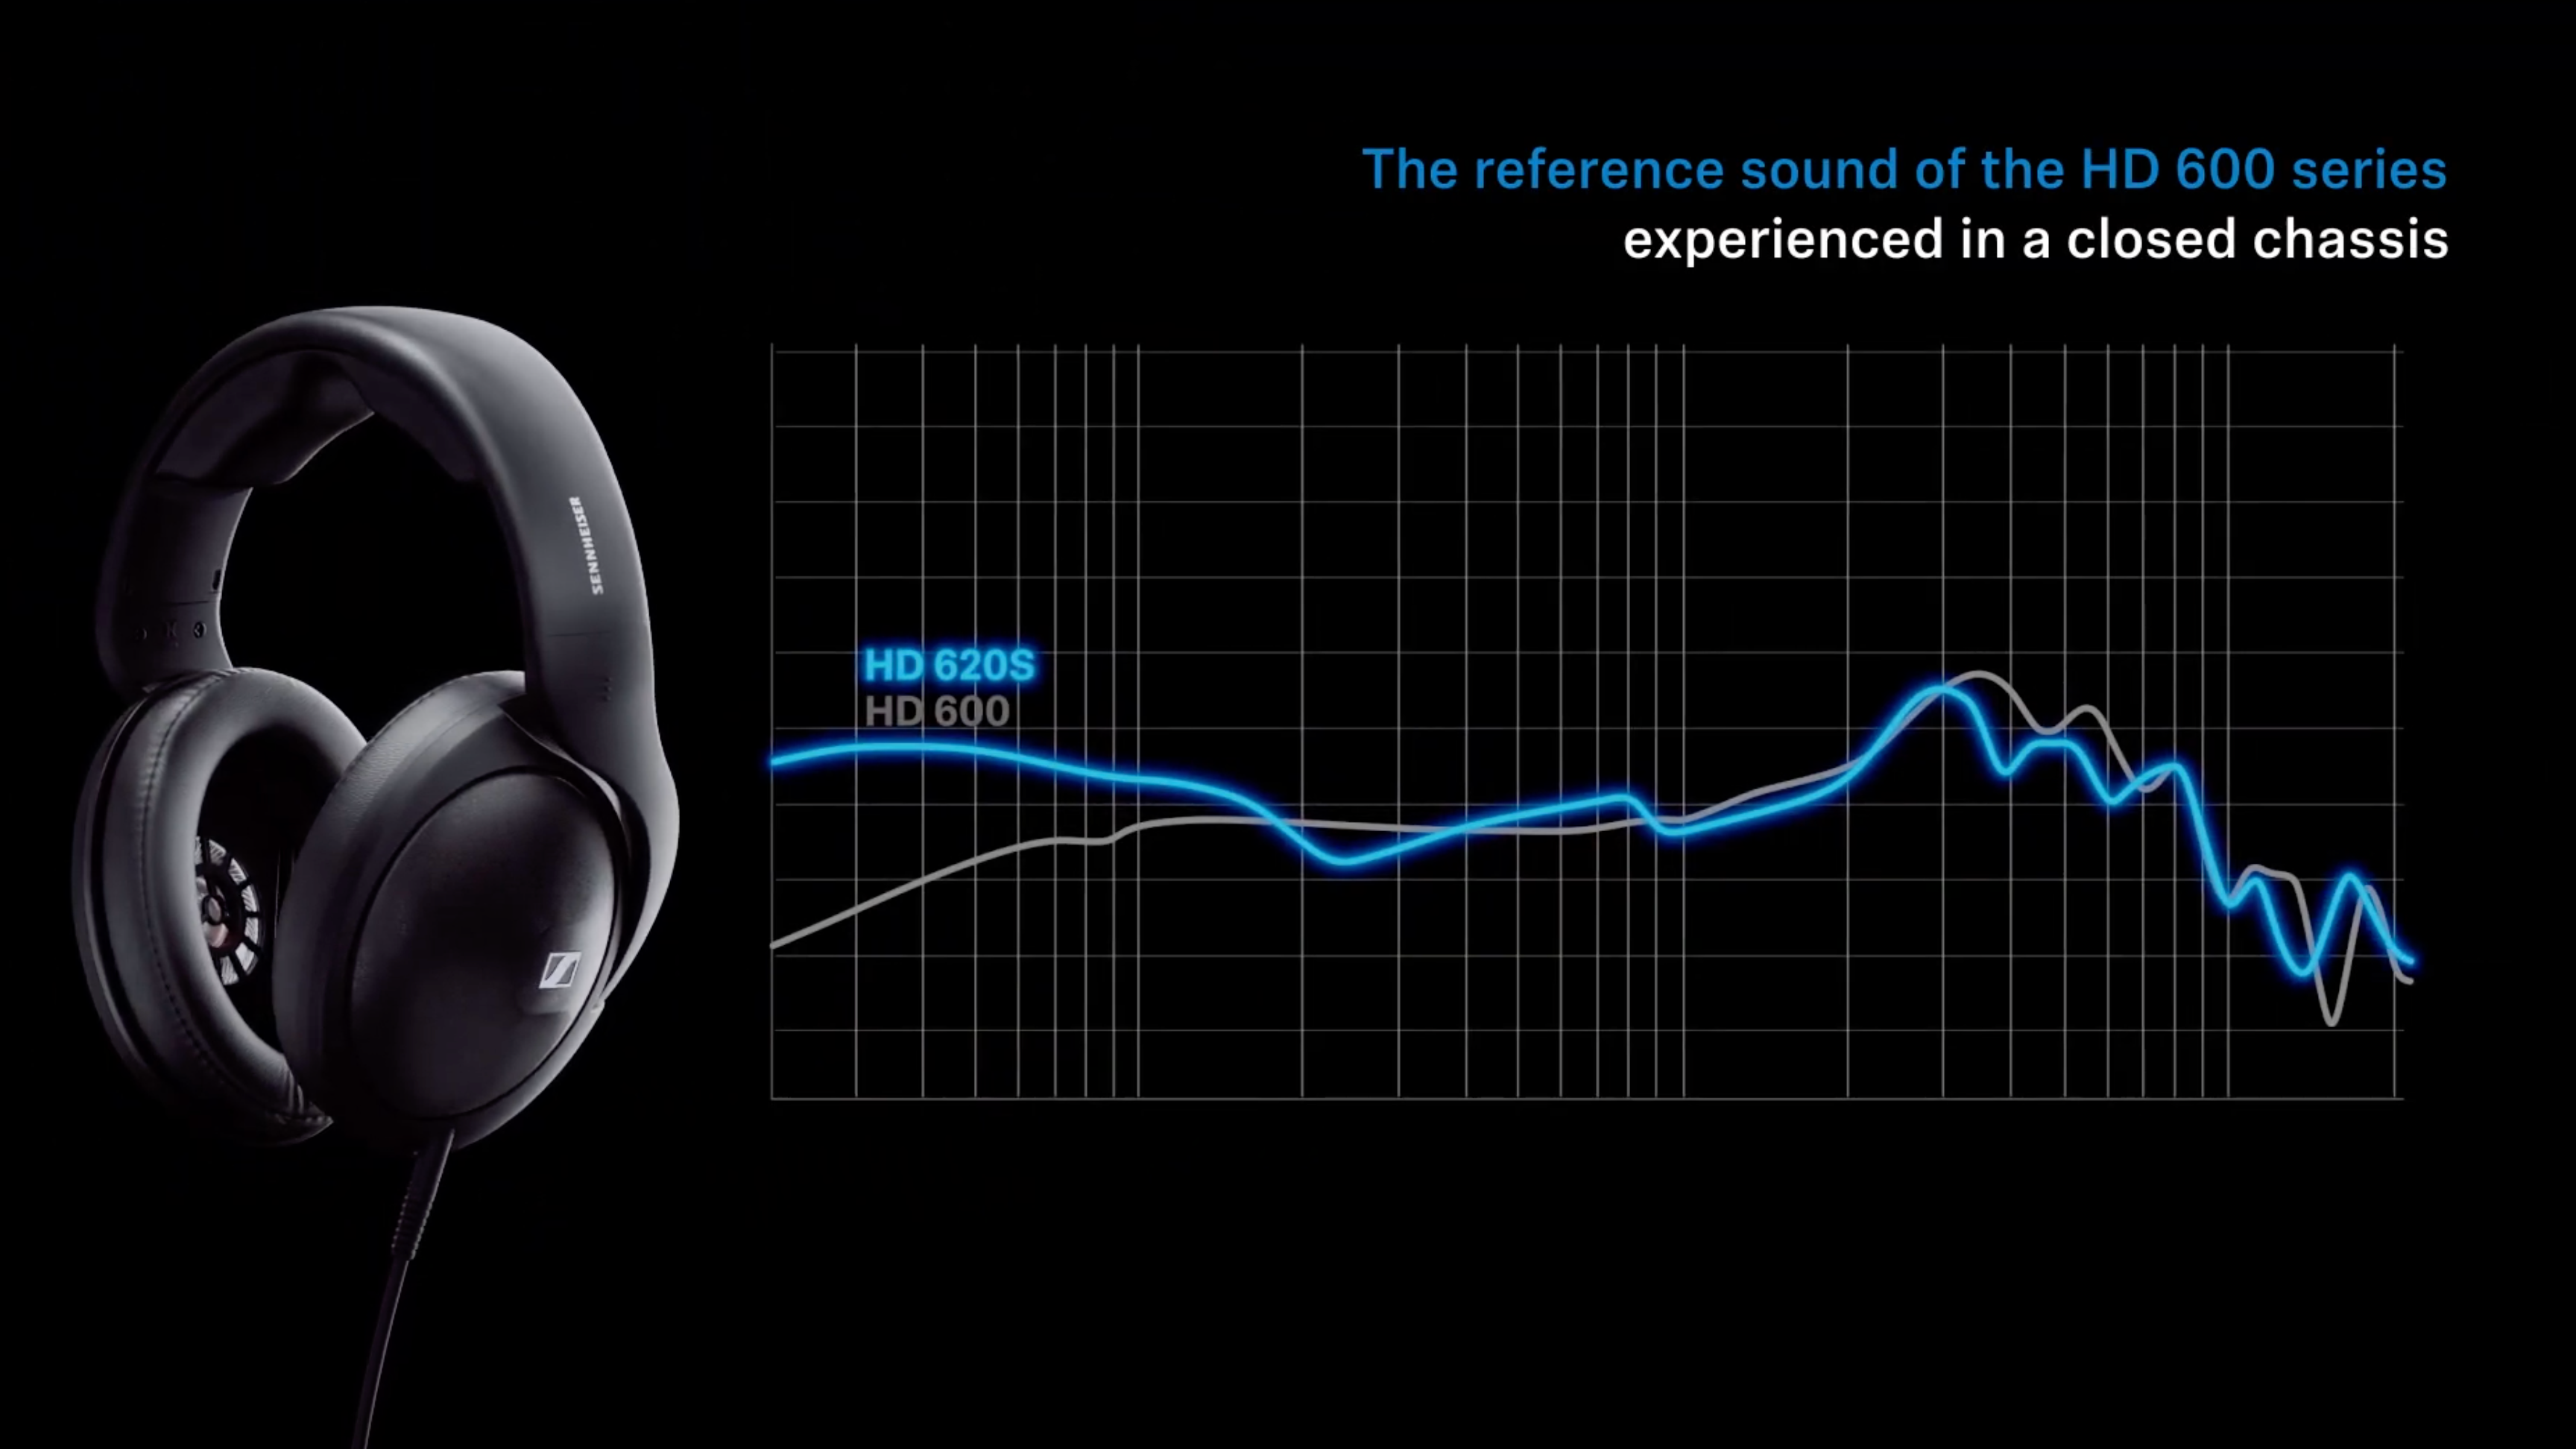 A screencap of Sennheiser's promotional video for the HD 620S, showing the Sennheiser HD 620S frequency response in comparison to the HD 600.